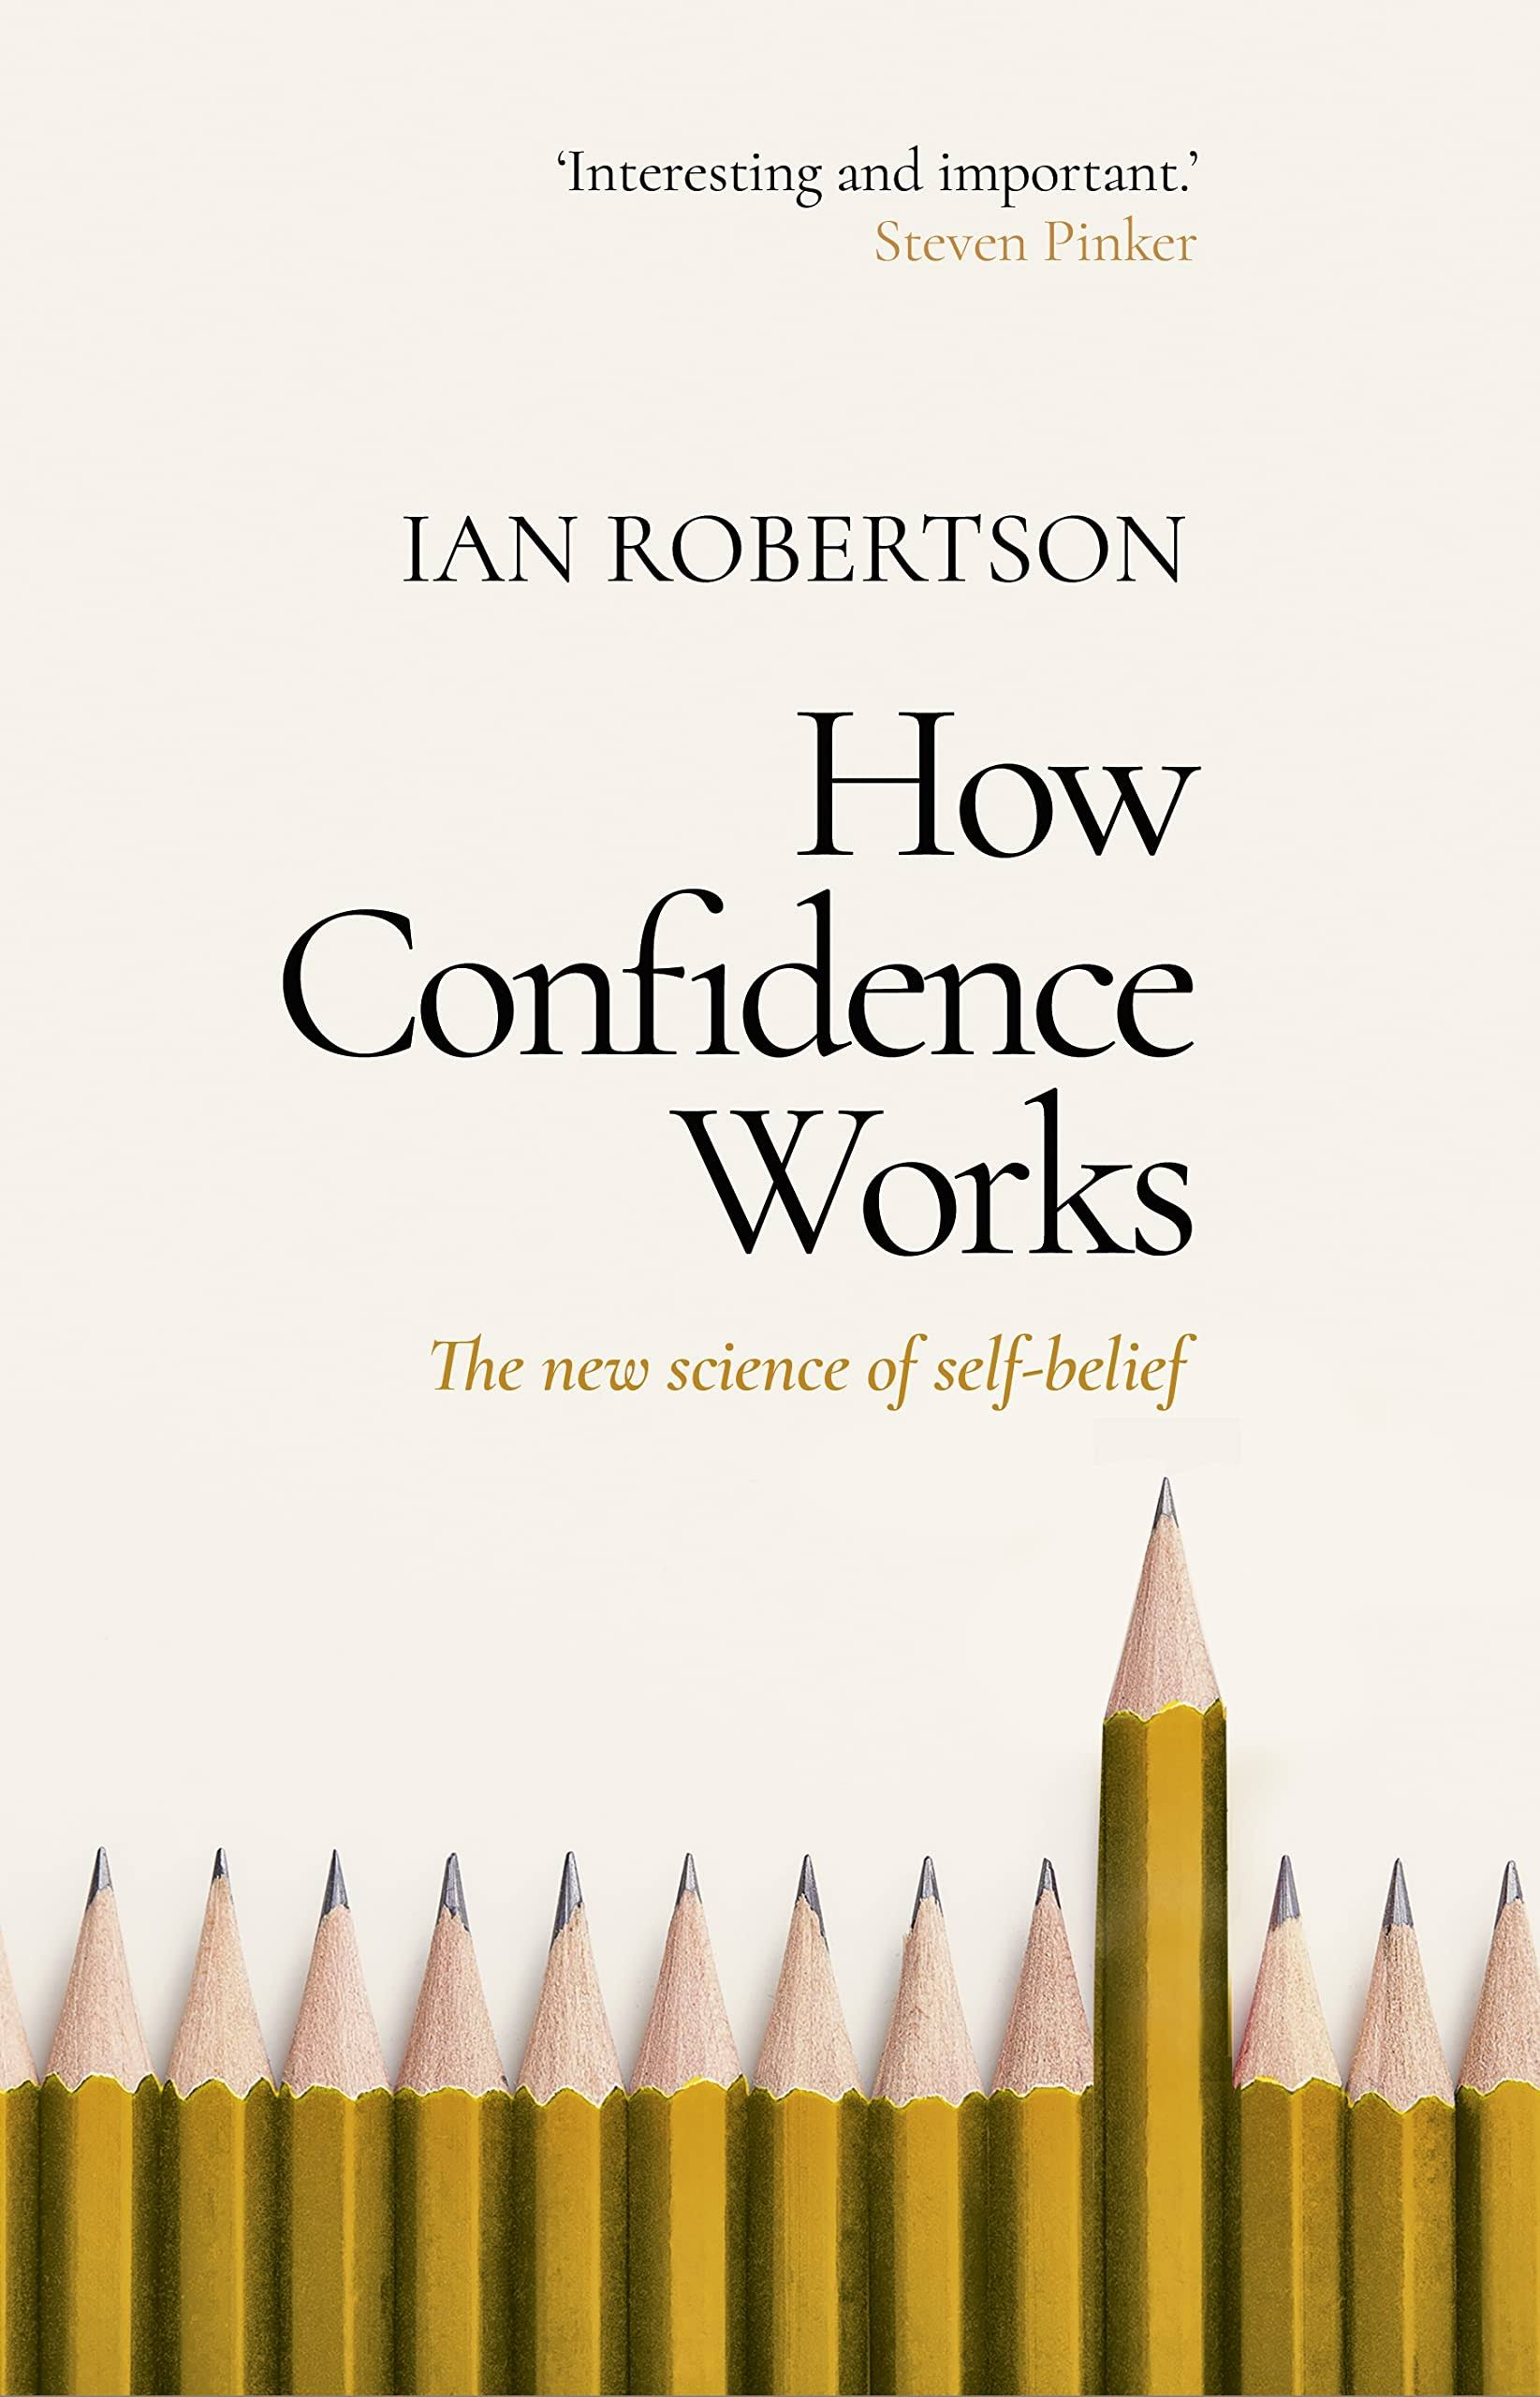 How Confidence Works: The New Science of Self-belief [Book]